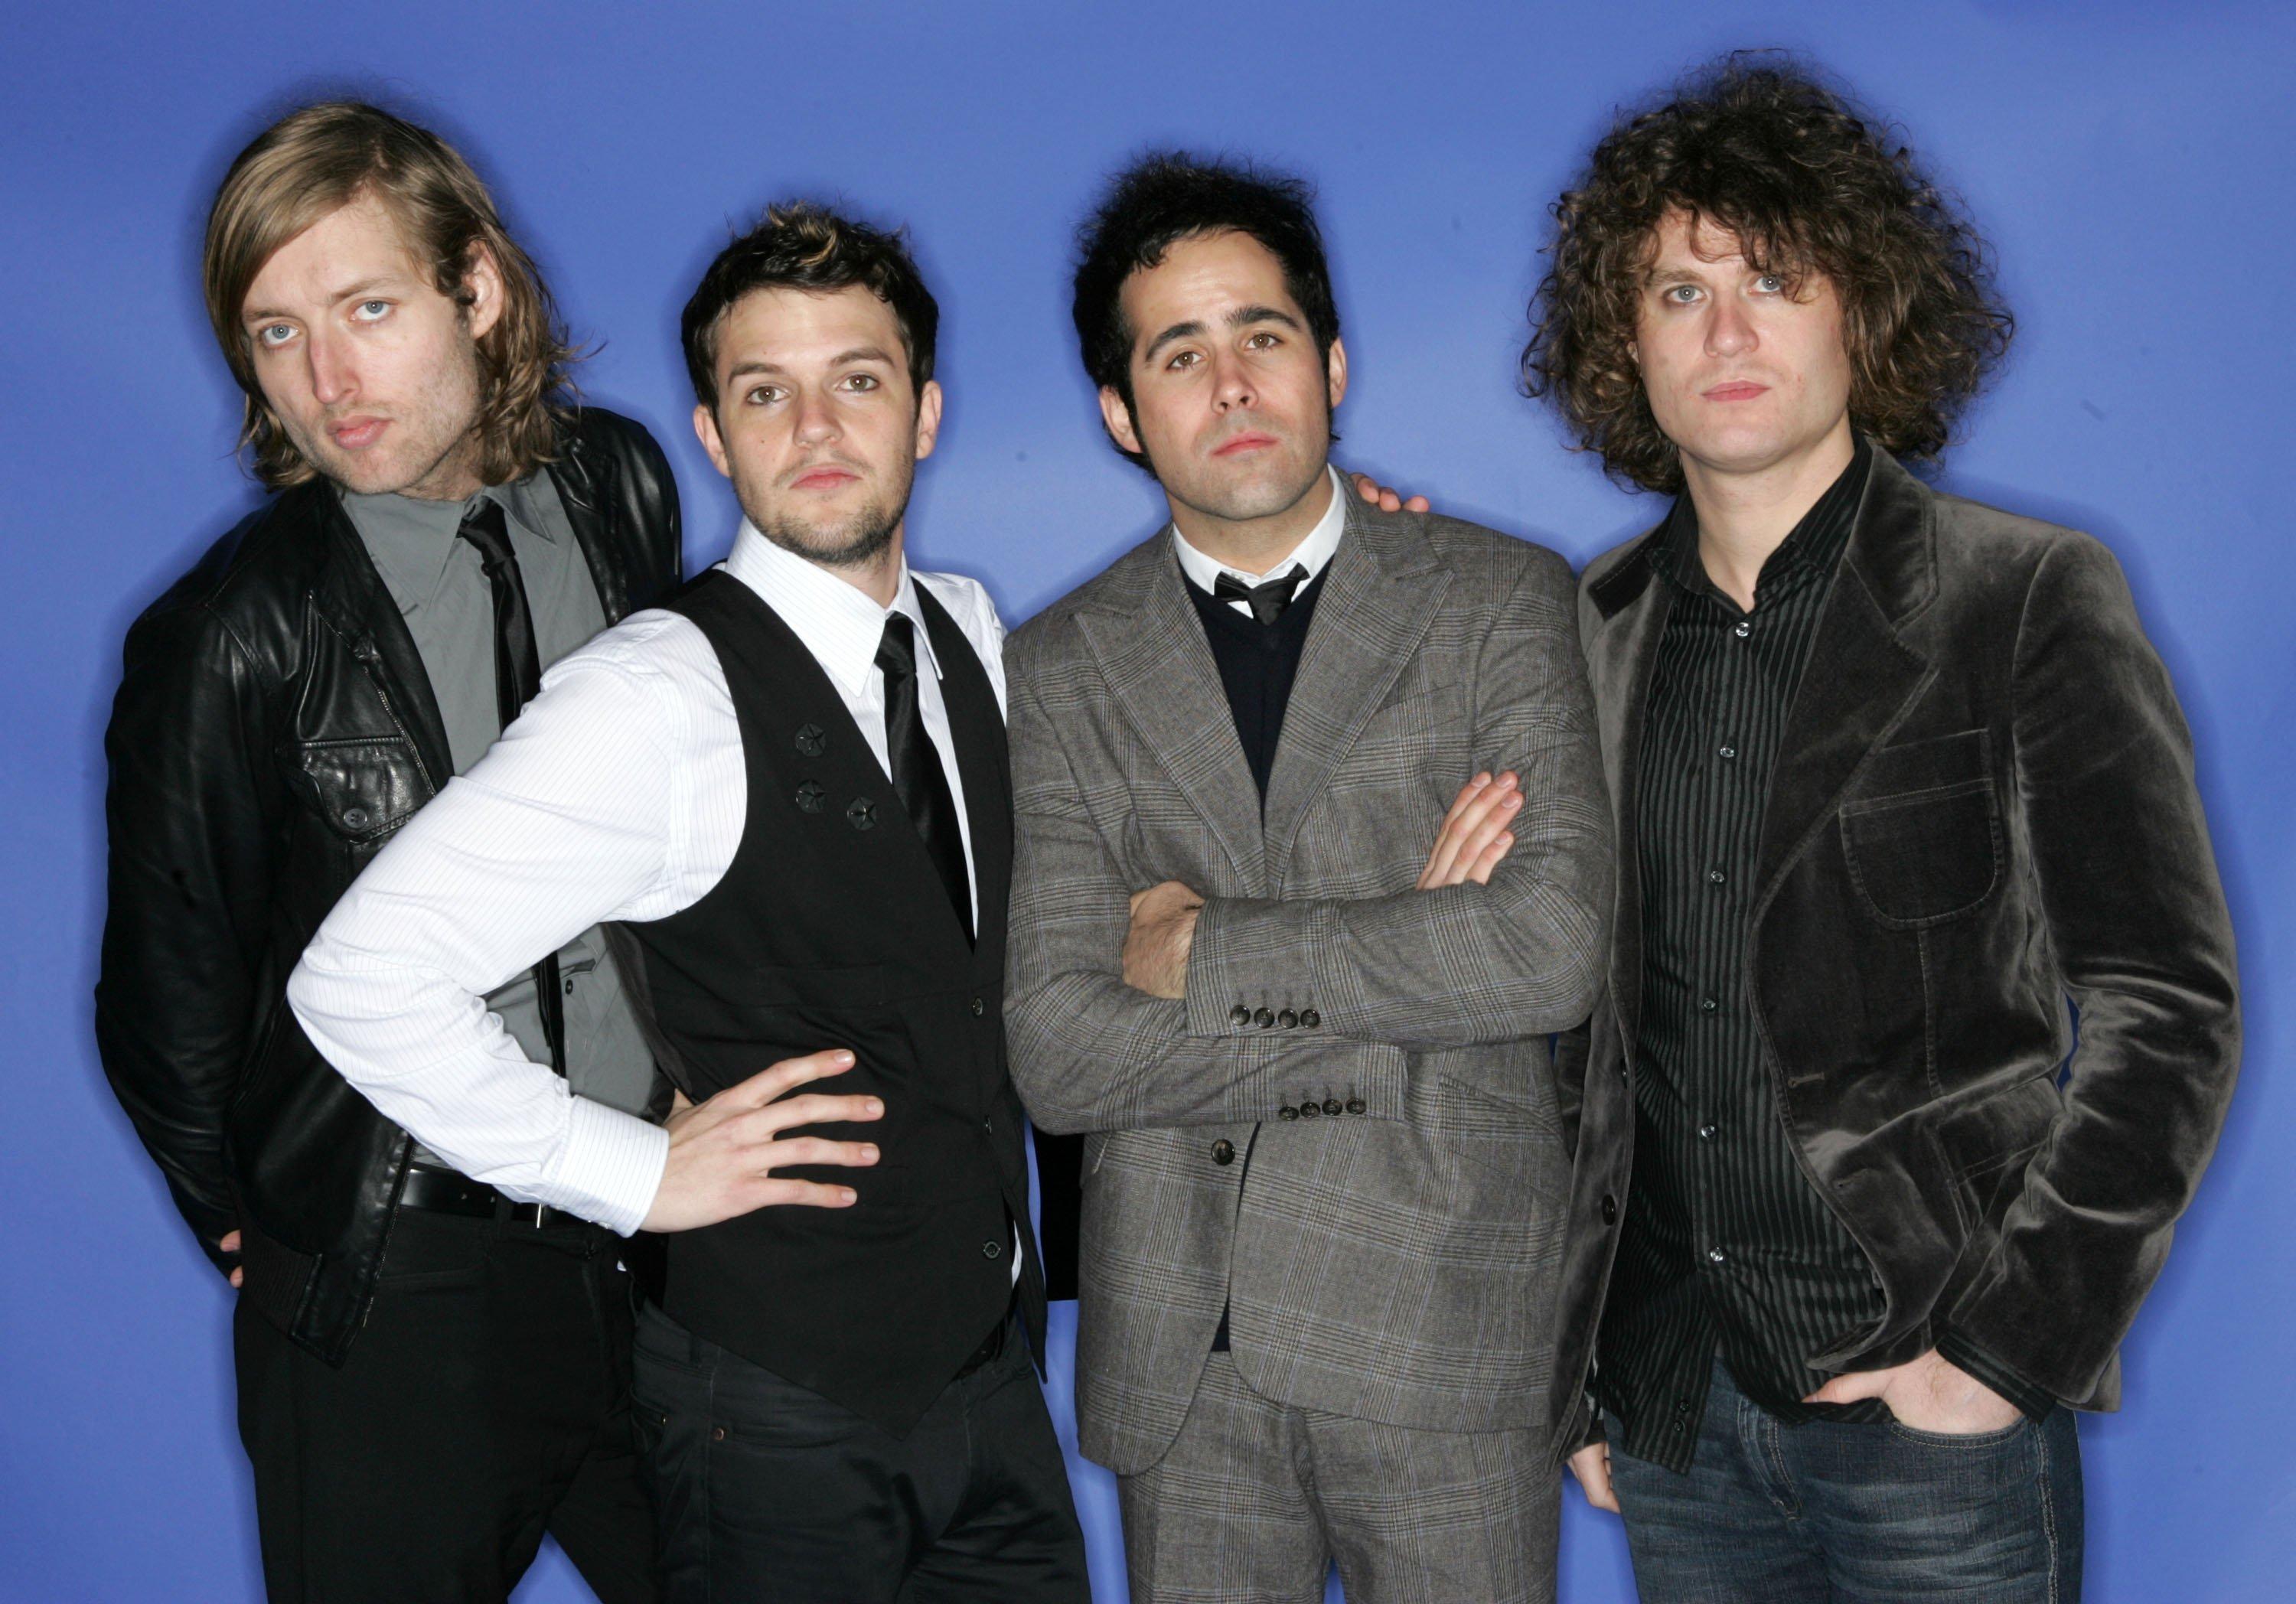 Musicians Mark Stoermer, Brandon Flowers, Ronnie Vannucci and David Keuning of The Killers poses for a portrait during the 2004 Billboard Music Awards at the MGM Grand Garden Arena on December 8, 2004 in Las Vegas, Nevada.